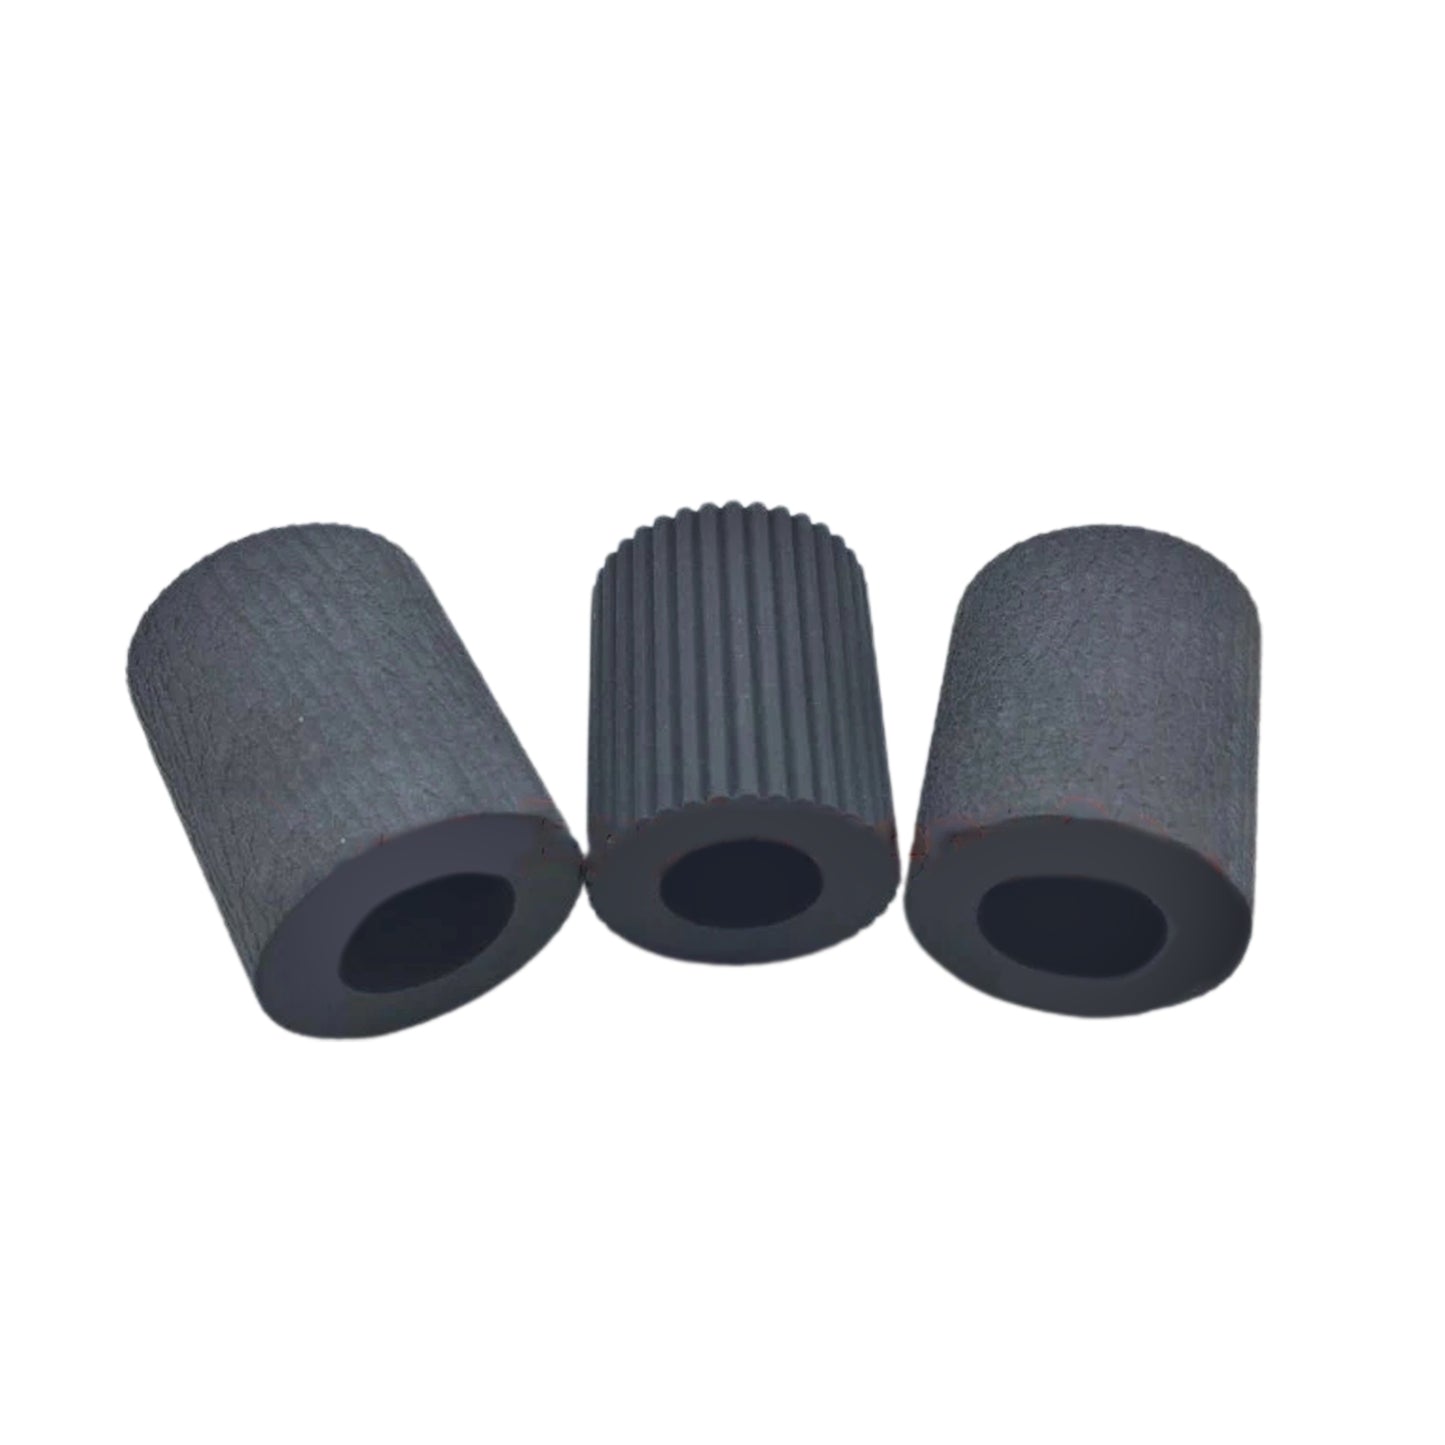 Paper Pickup Feed Separation Roller tire rubber for Kyocera KM1620 1635 2020 2050 3035 3040 4030 5050 2AR07220 2AR07230 2AR07240